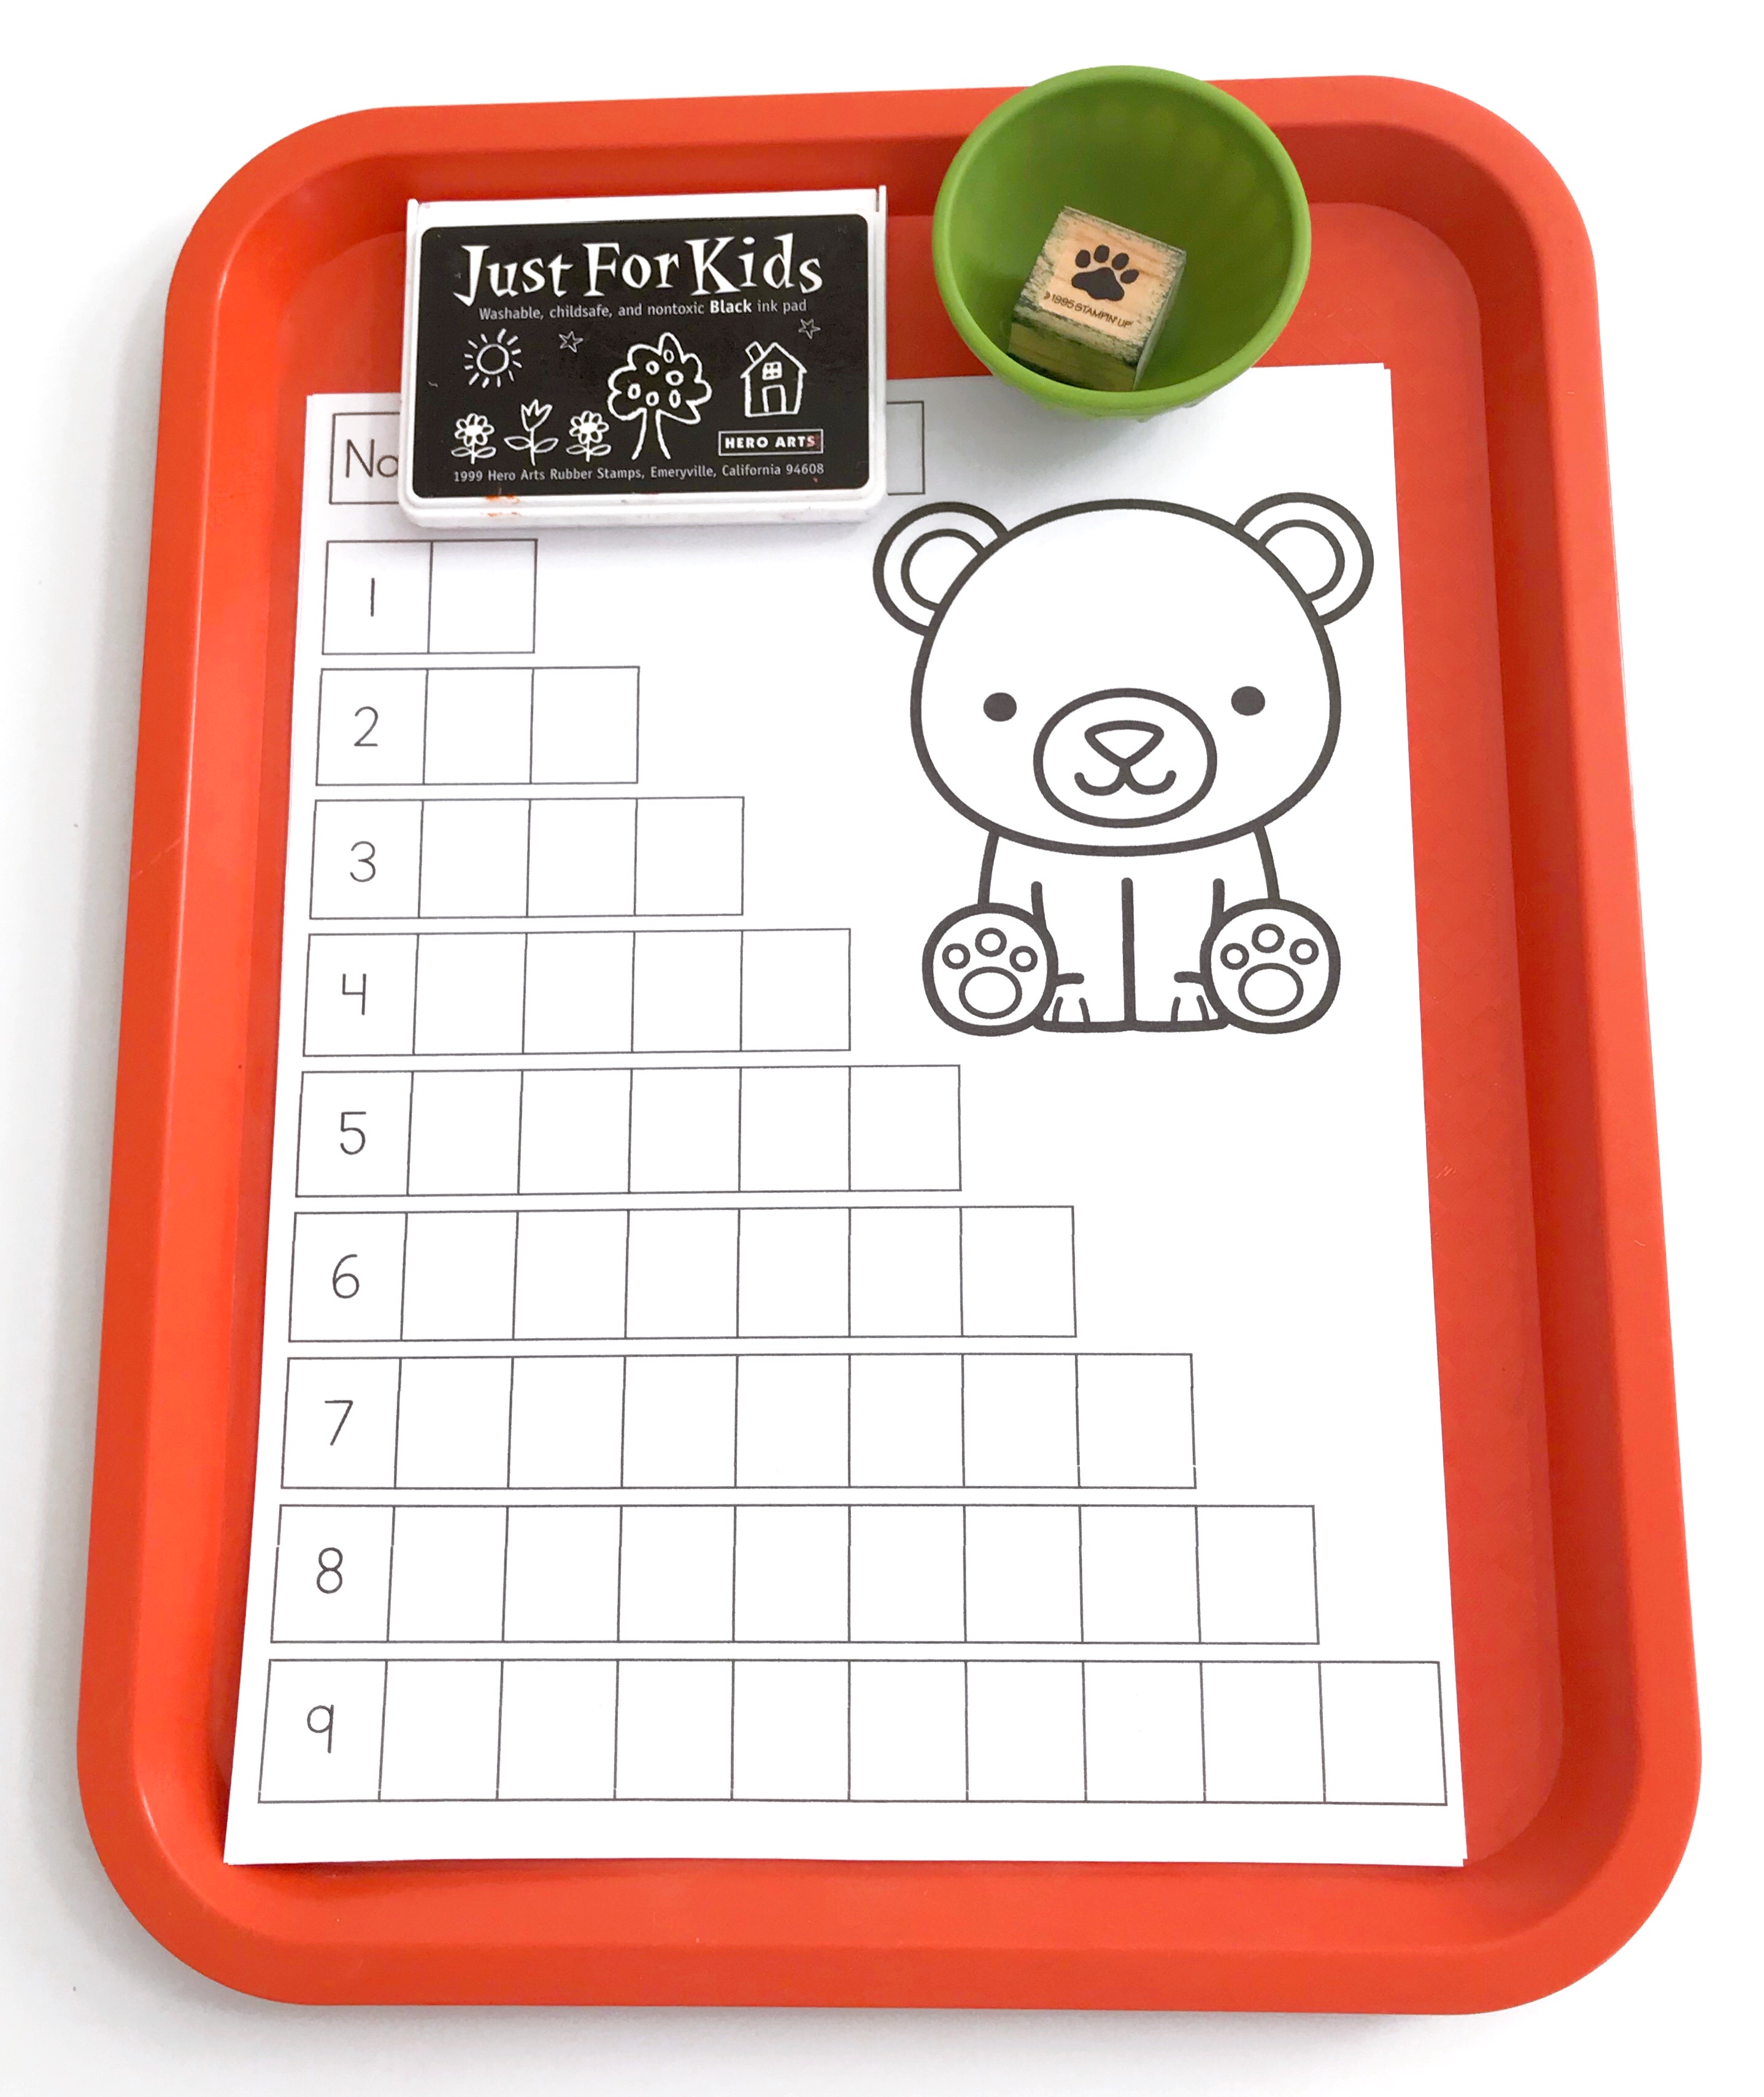 Teddy Bear themed stamping activity